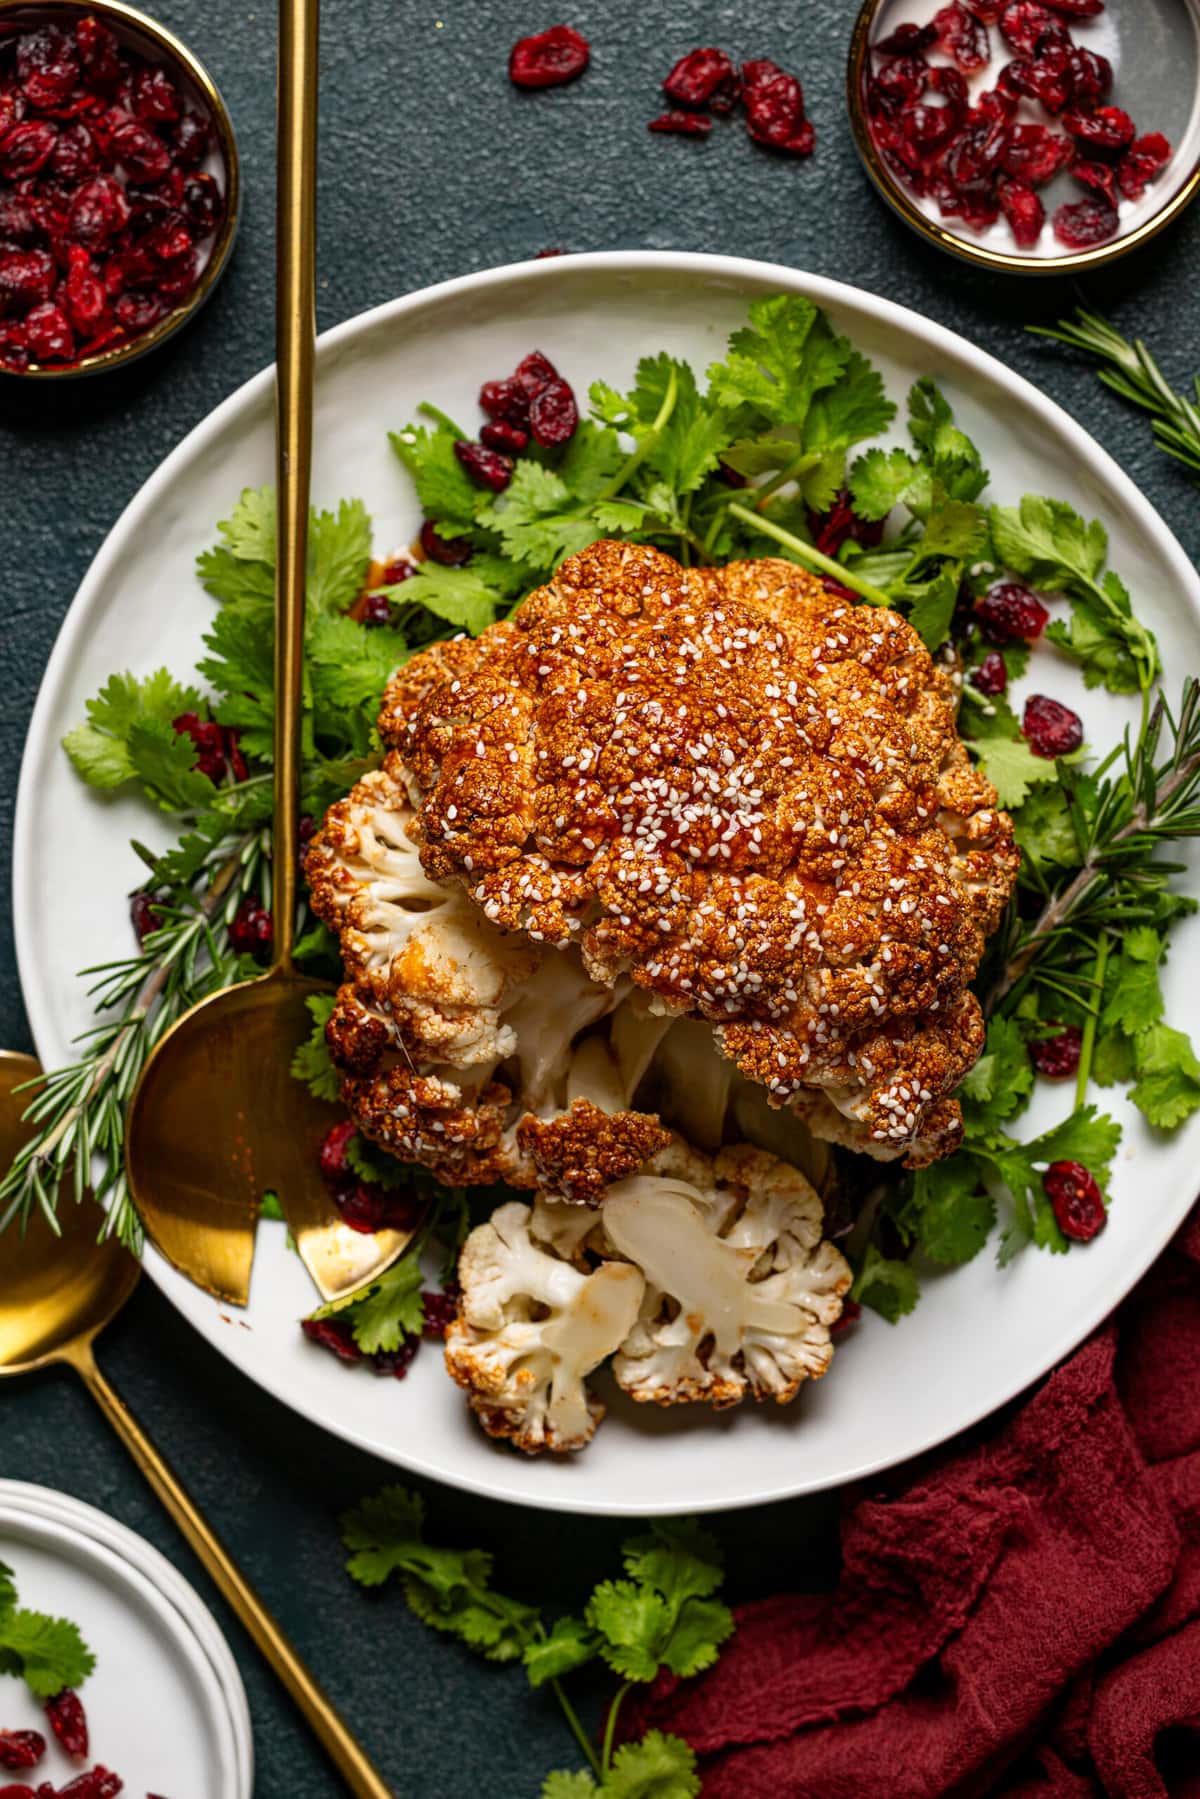 Roasted cauliflower sliced atop herbs + cranberries on a platter with two serving spoons.